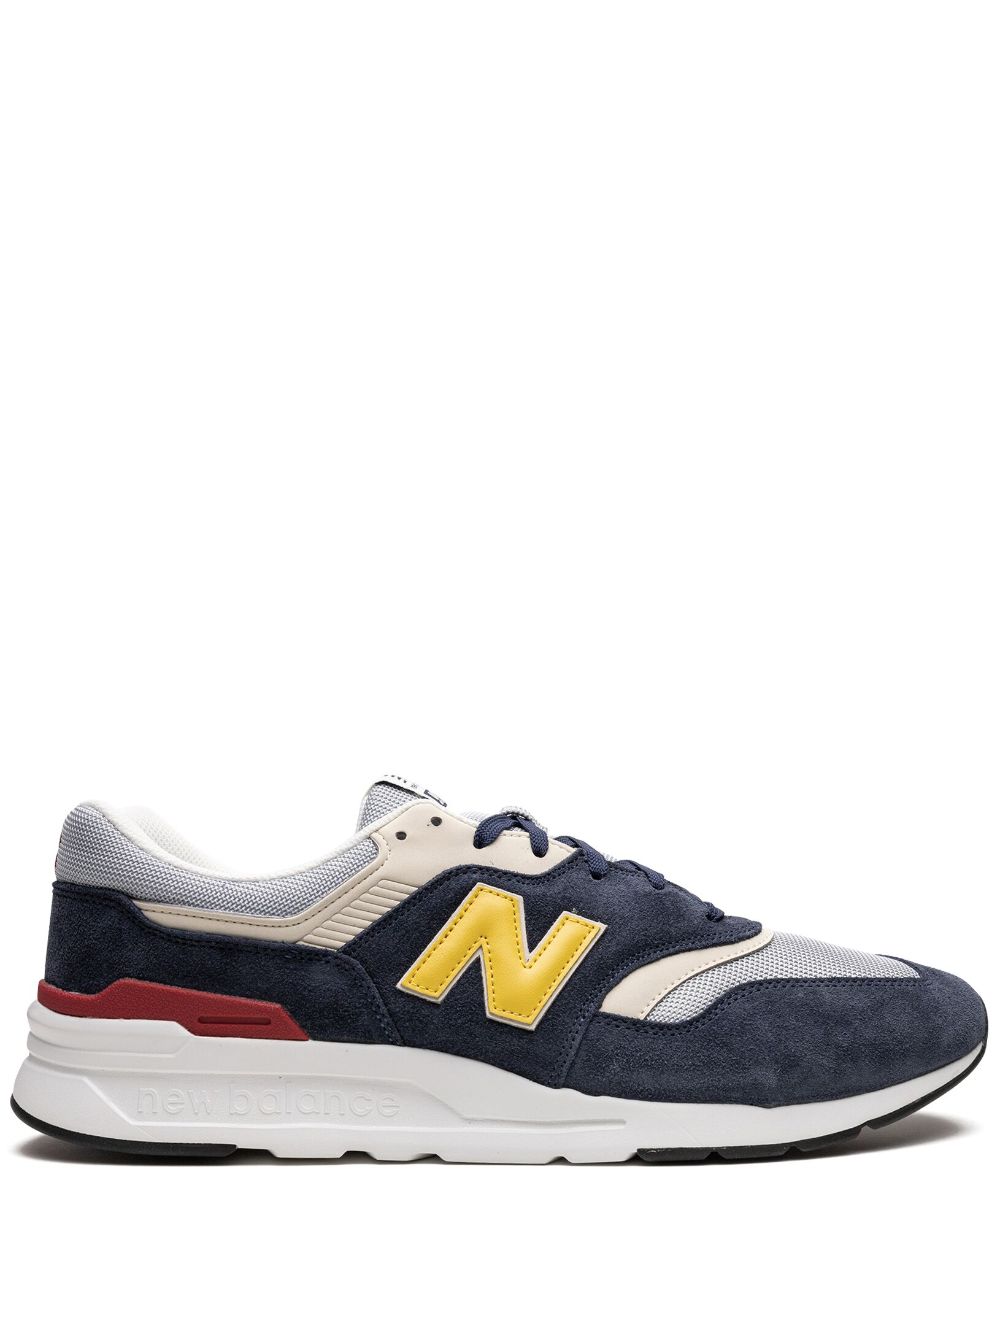 New Balance 997H low-top sneakers - Blue von New Balance